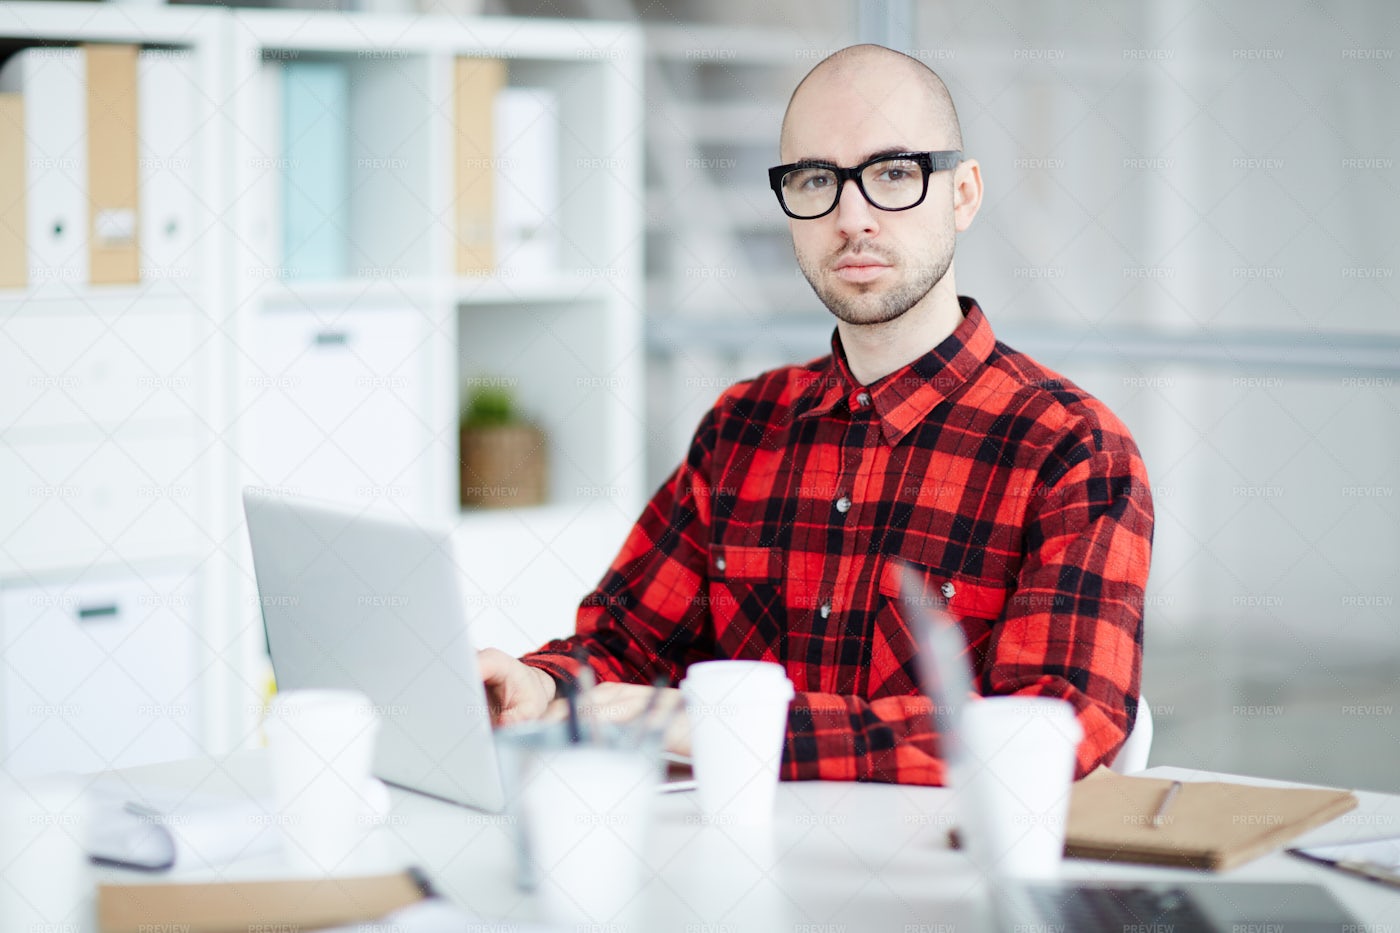 Businessman Working At Office: Stock Photos